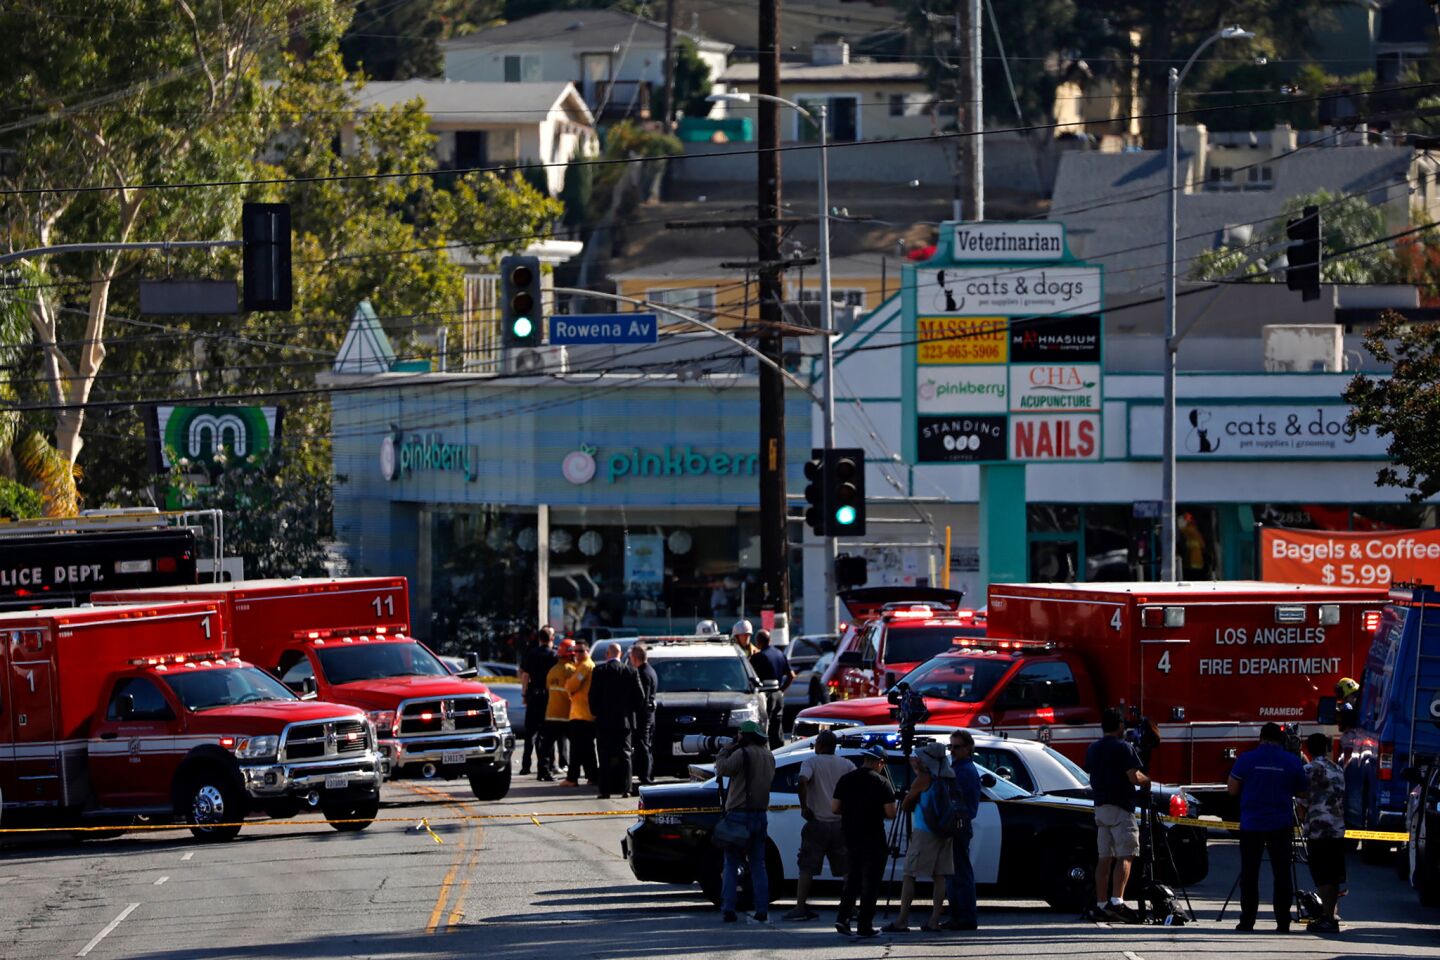 The scene around the Trader Joe's in Silver Lake after a police pursuit ended near there and a hostage drama ensued.